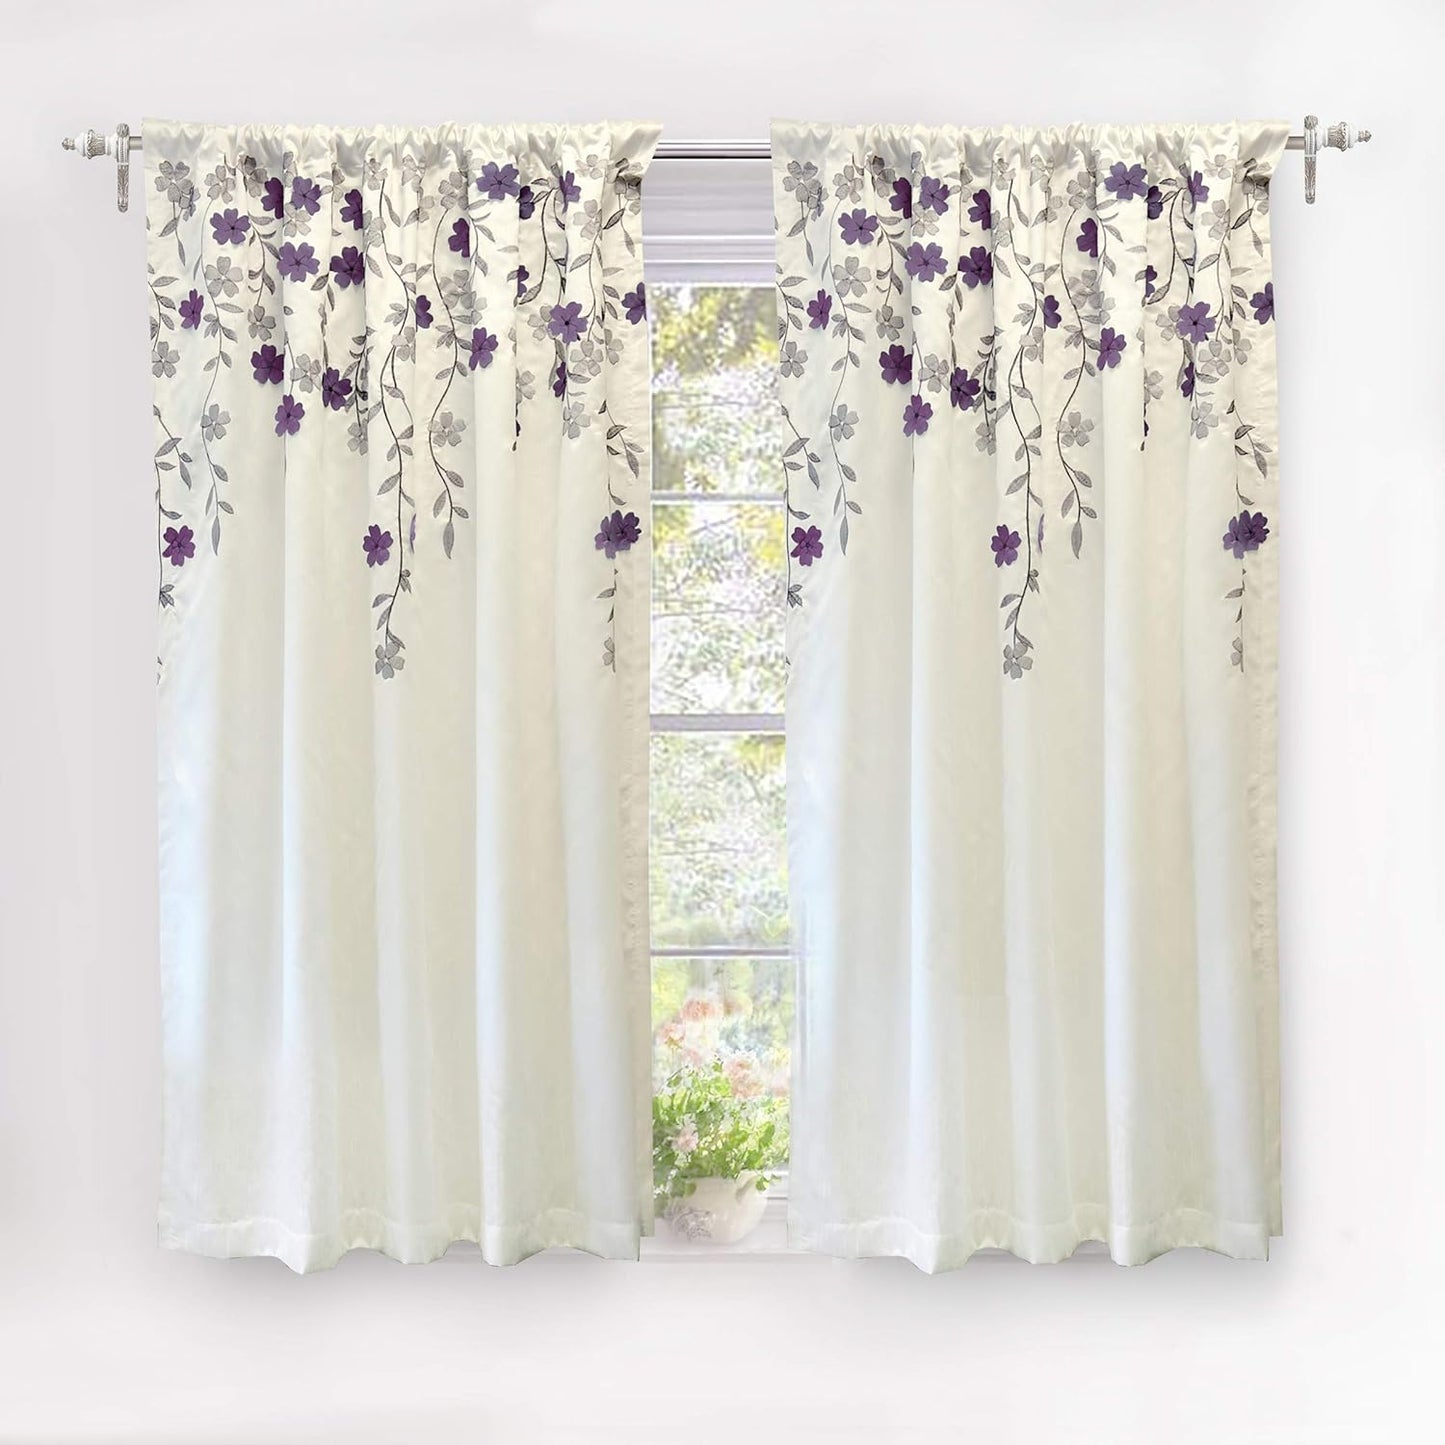 Driftaway Aubree Weeping Flower Print Thermal Room Darkening Privacy Window Curtain for Bedroom Living Room Rod Pocket 2 Panels 52 Inch by 84 Inch Blue  DriftAway One Panel Ivory Purple 50"X54" 